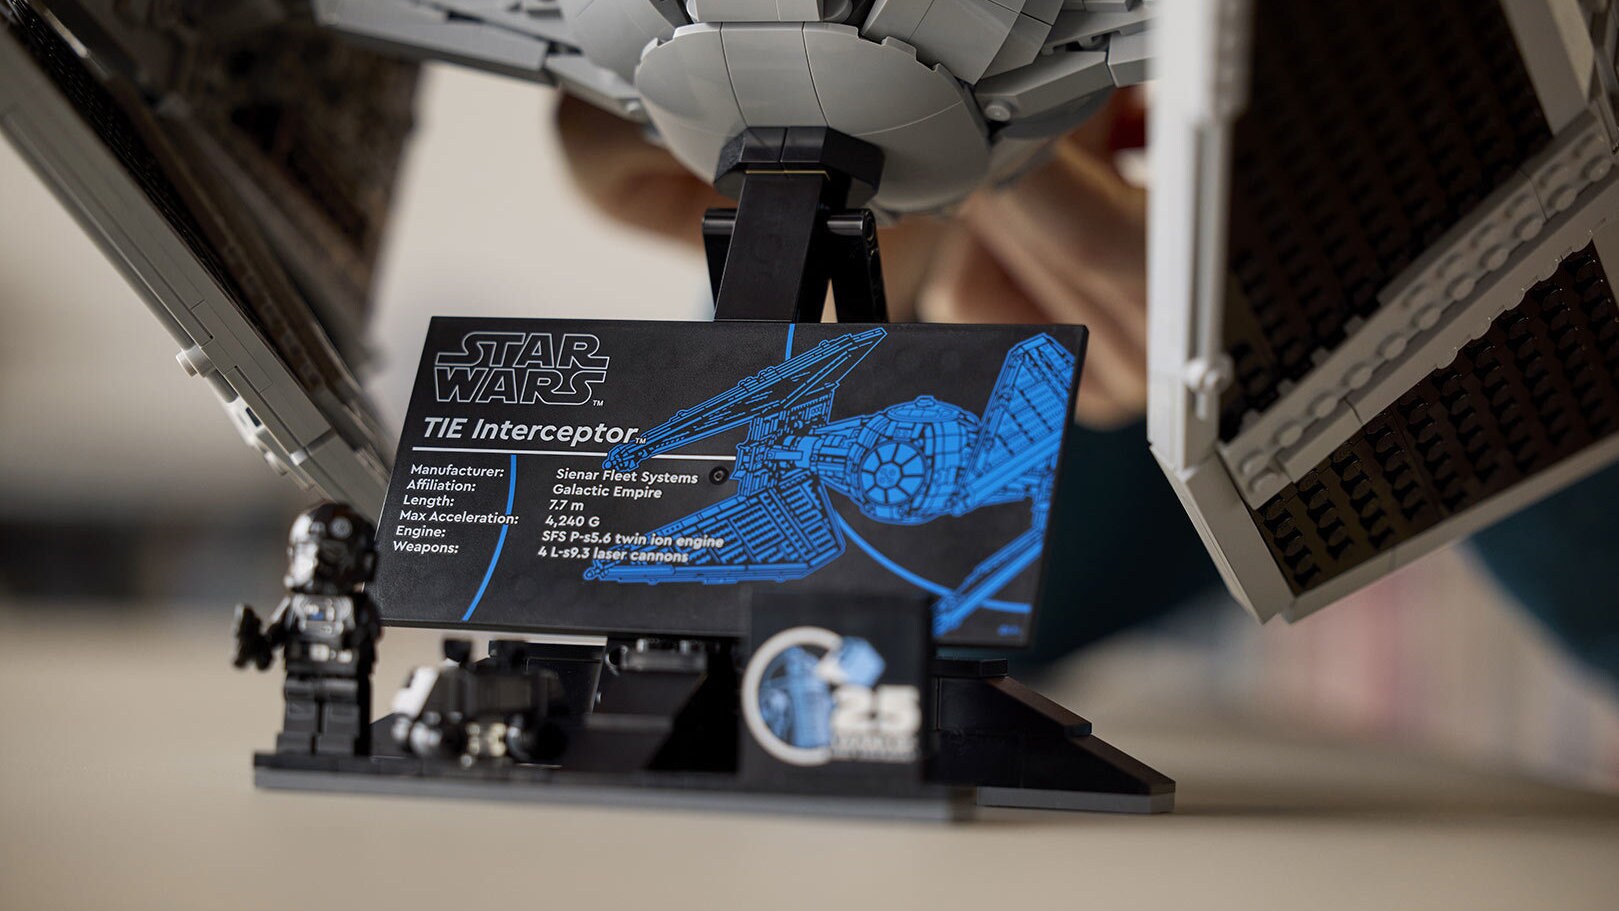 The LEGO Star Wars TIE Interceptor building set, available May 1